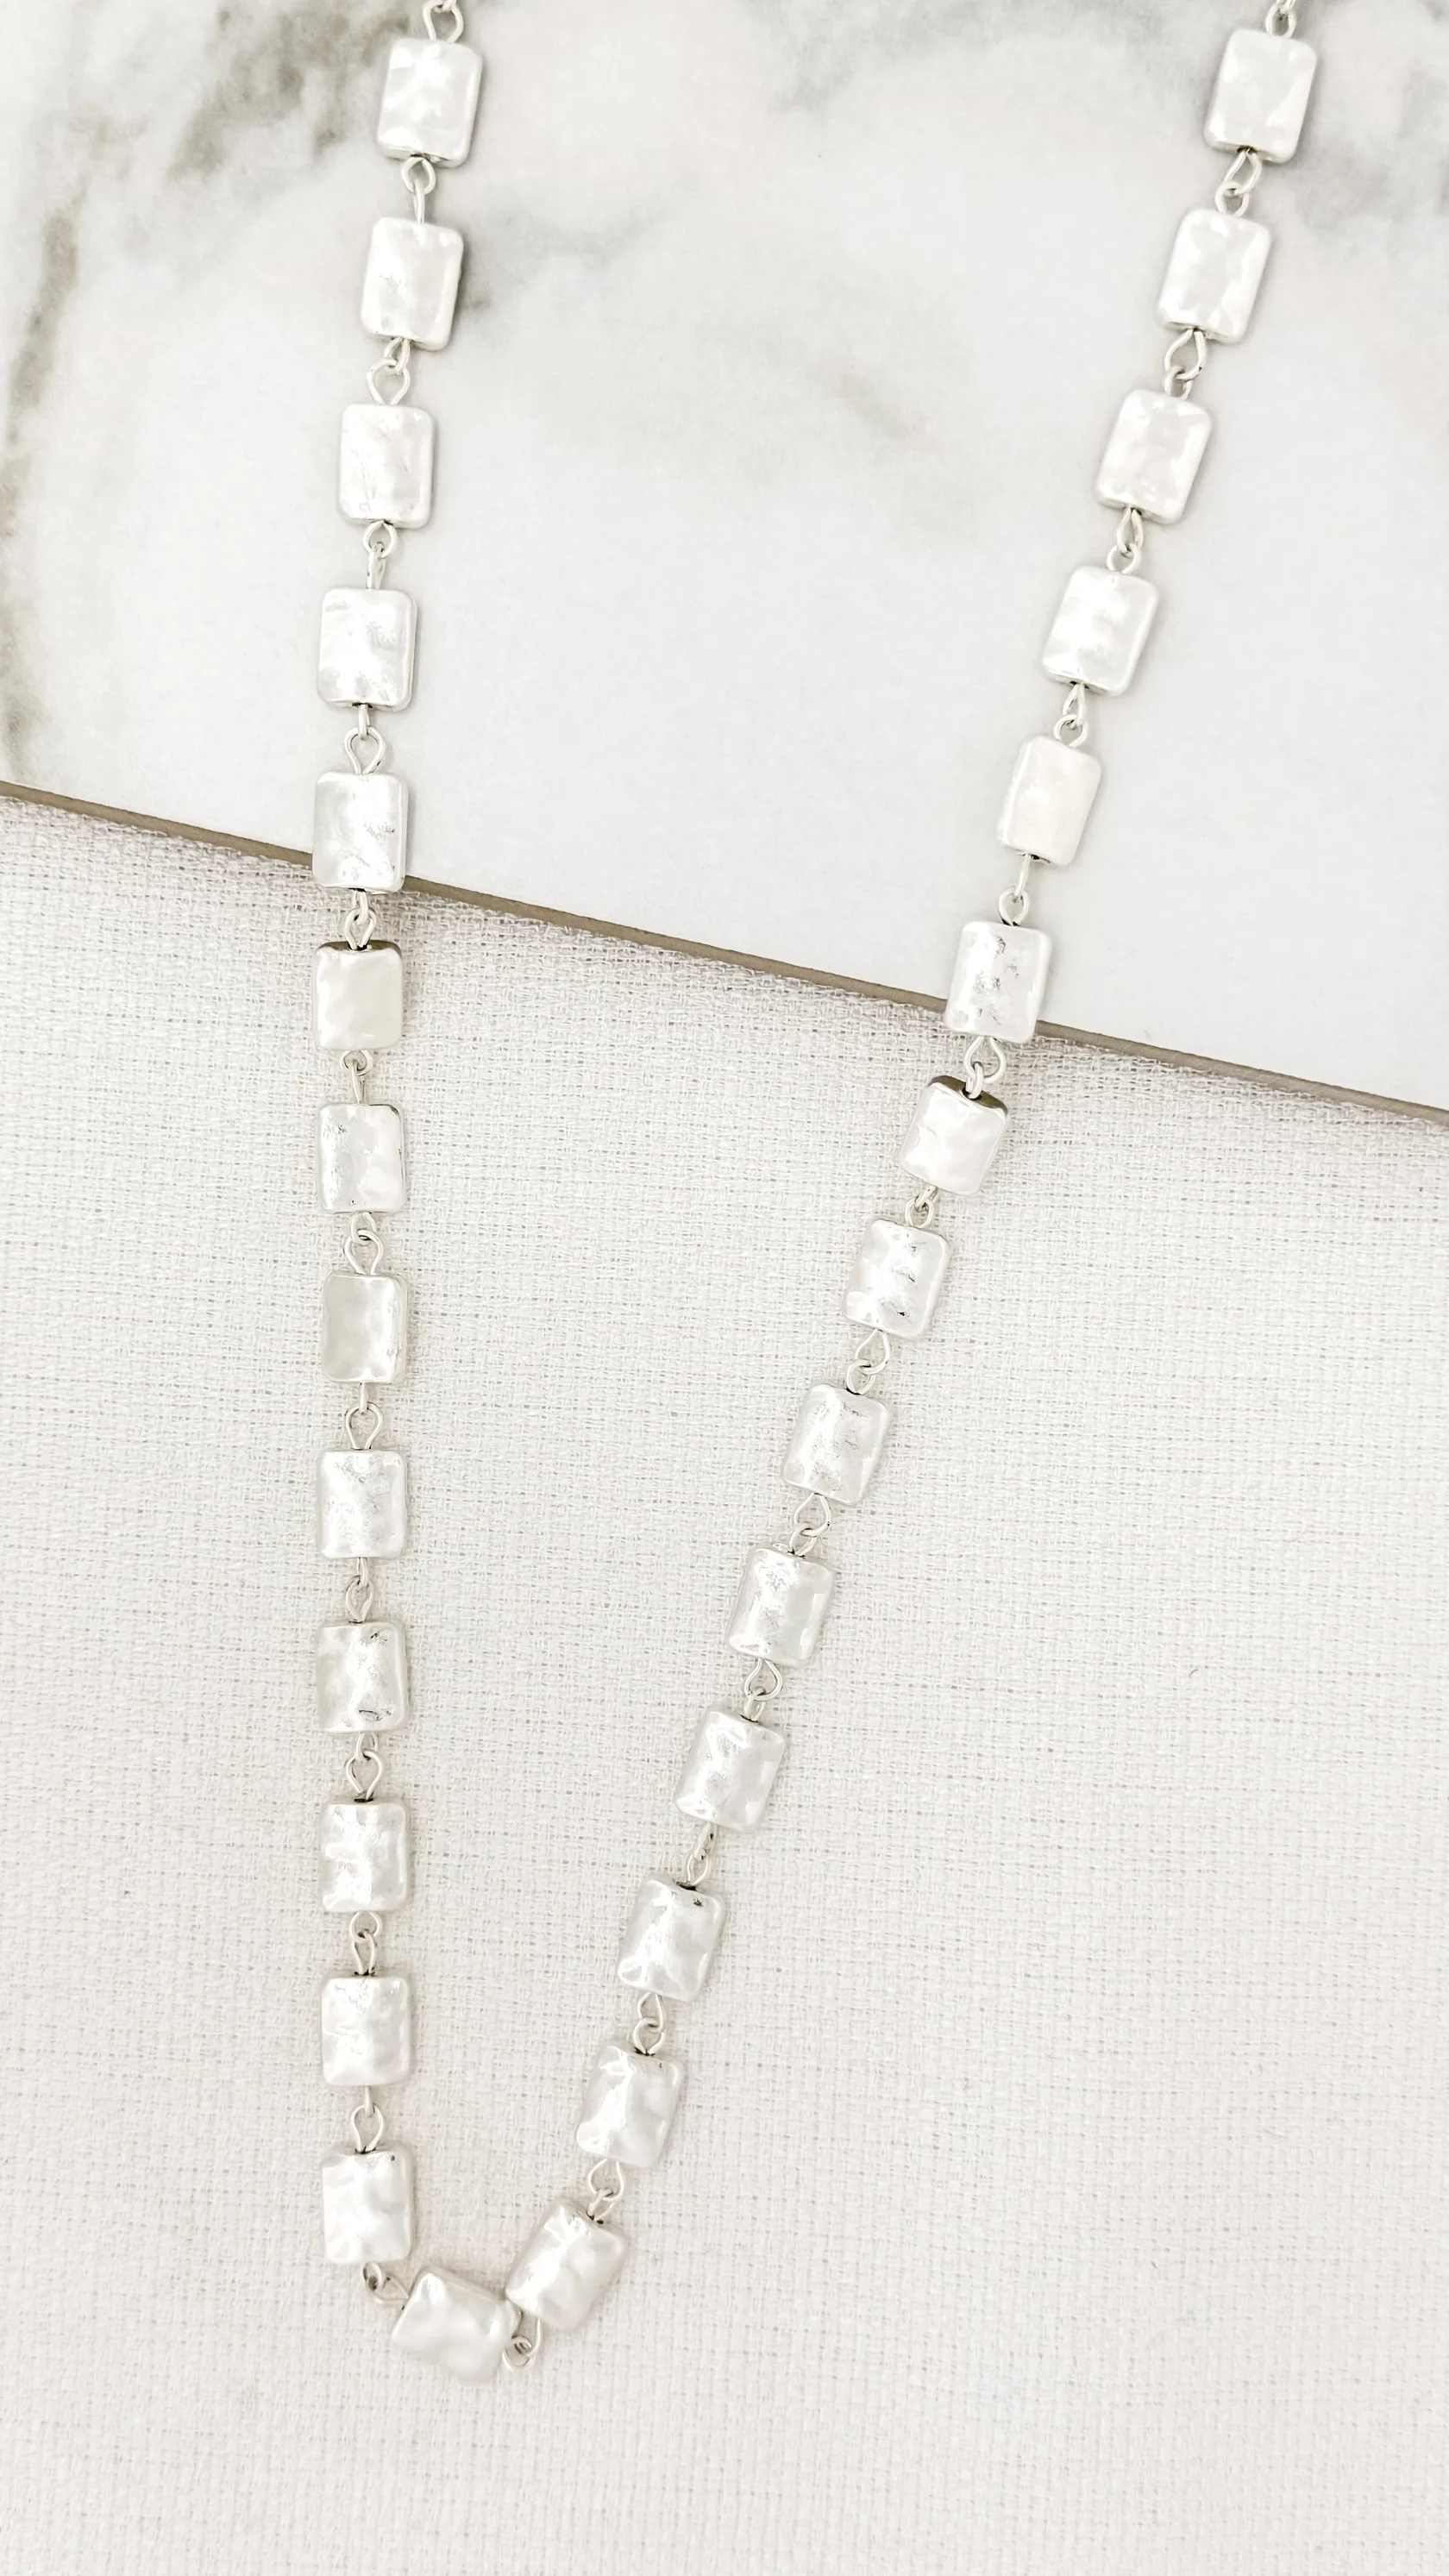 Envy Long Worn Silver Square Link Necklace